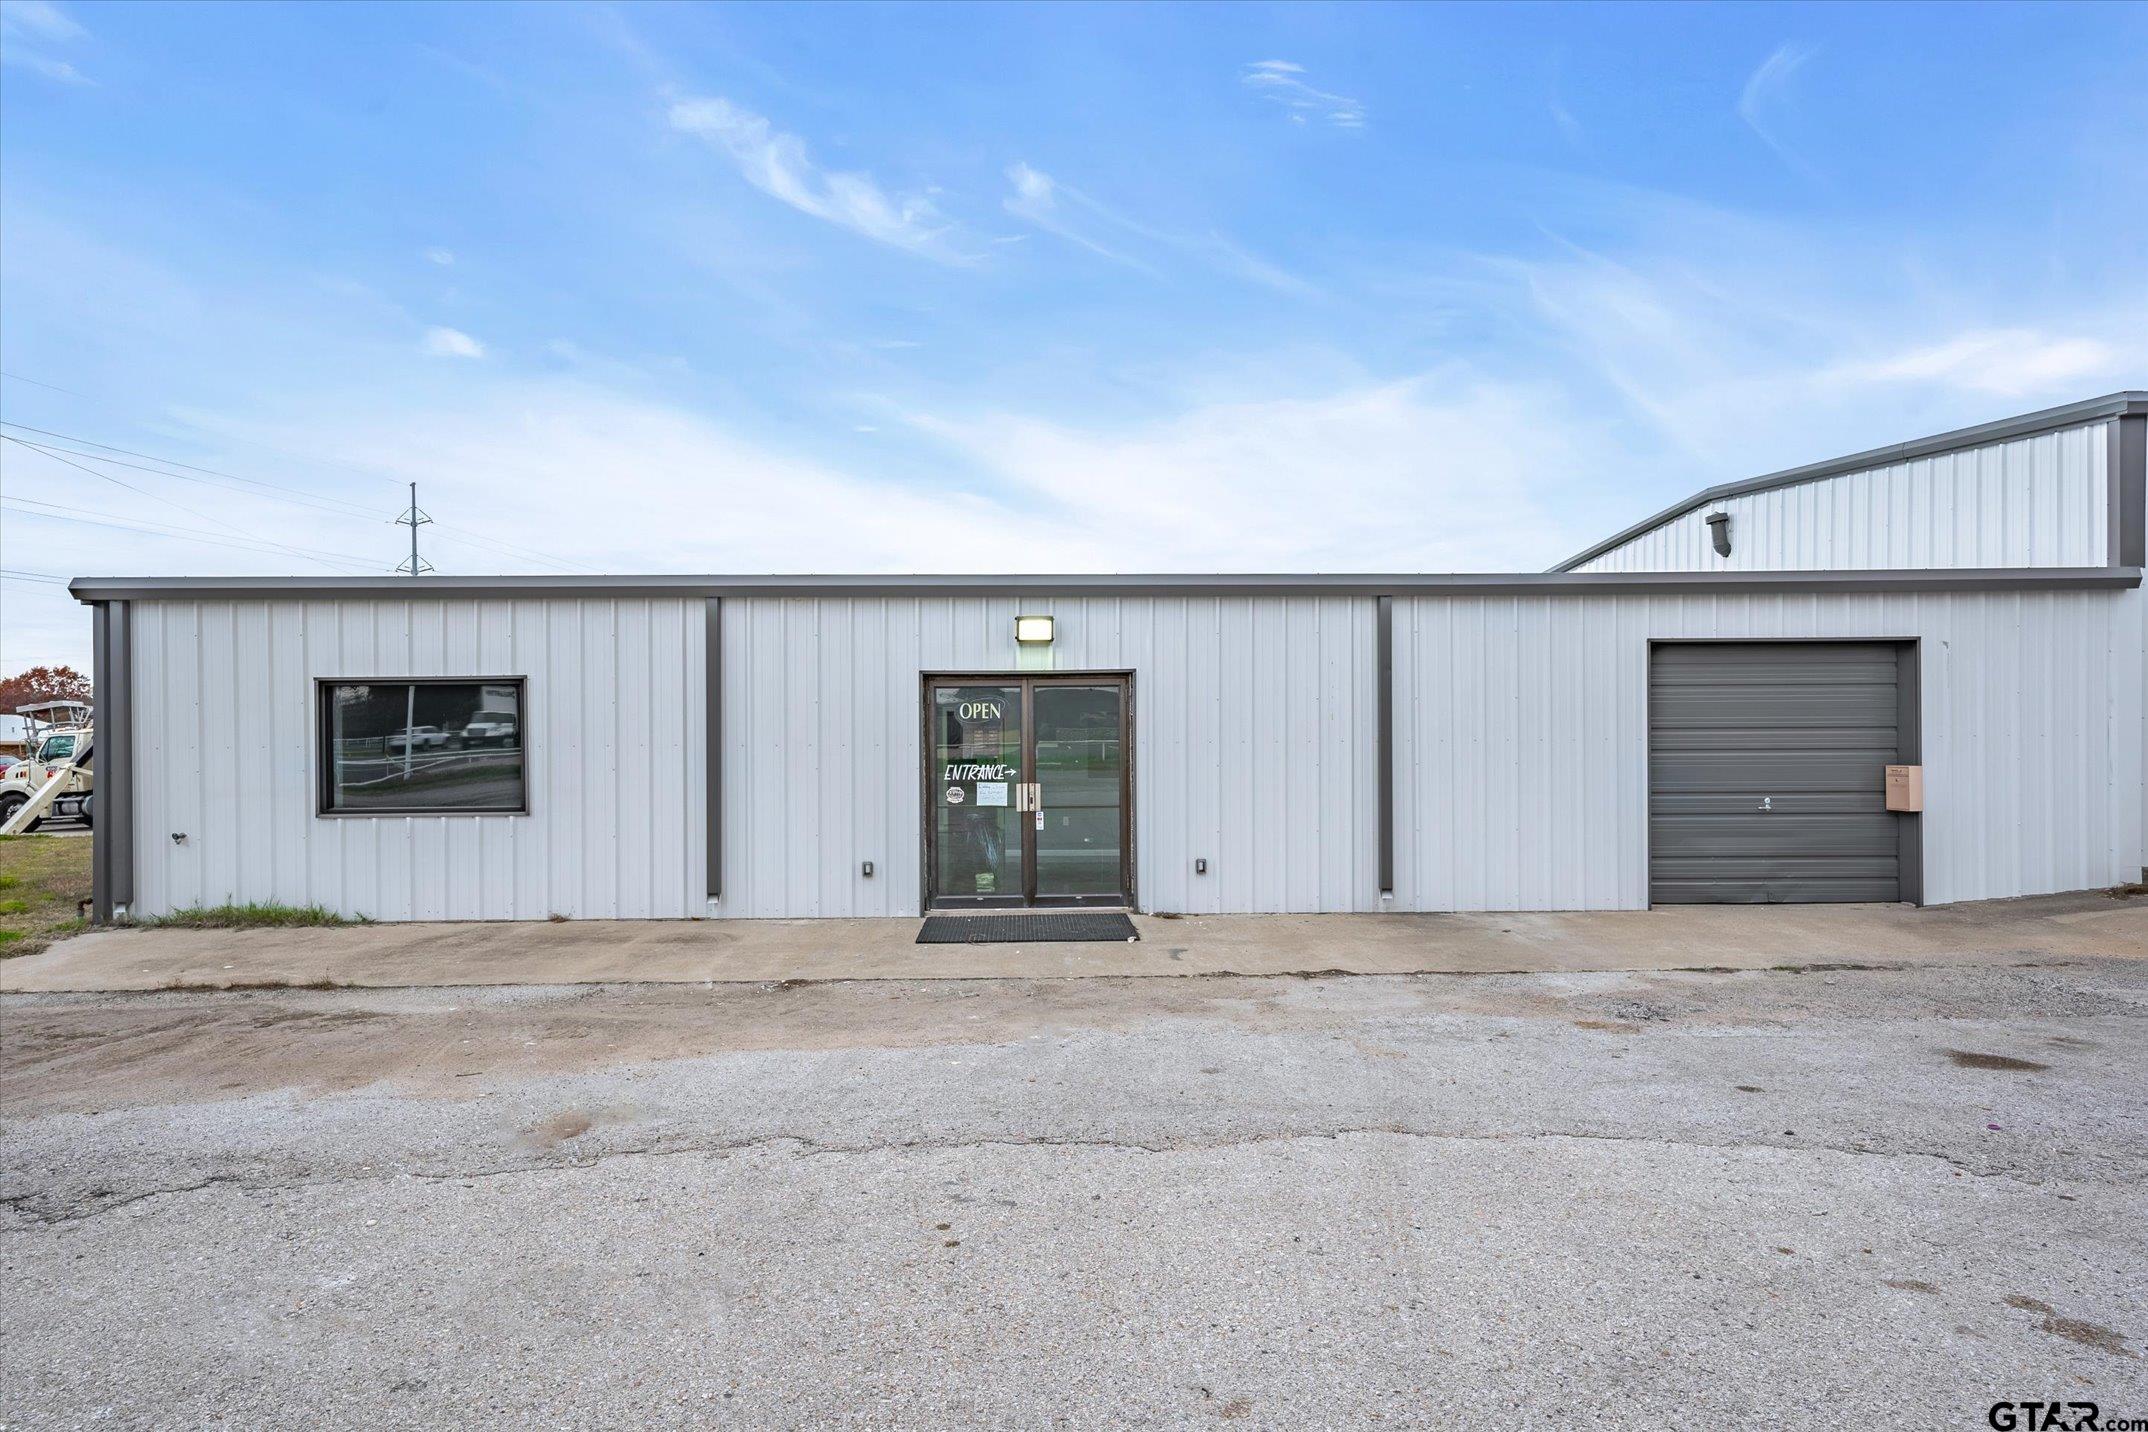 1111 Goodnight, Wills Point, Texas 75169, ,Building,For Sale,Goodnight,23016588